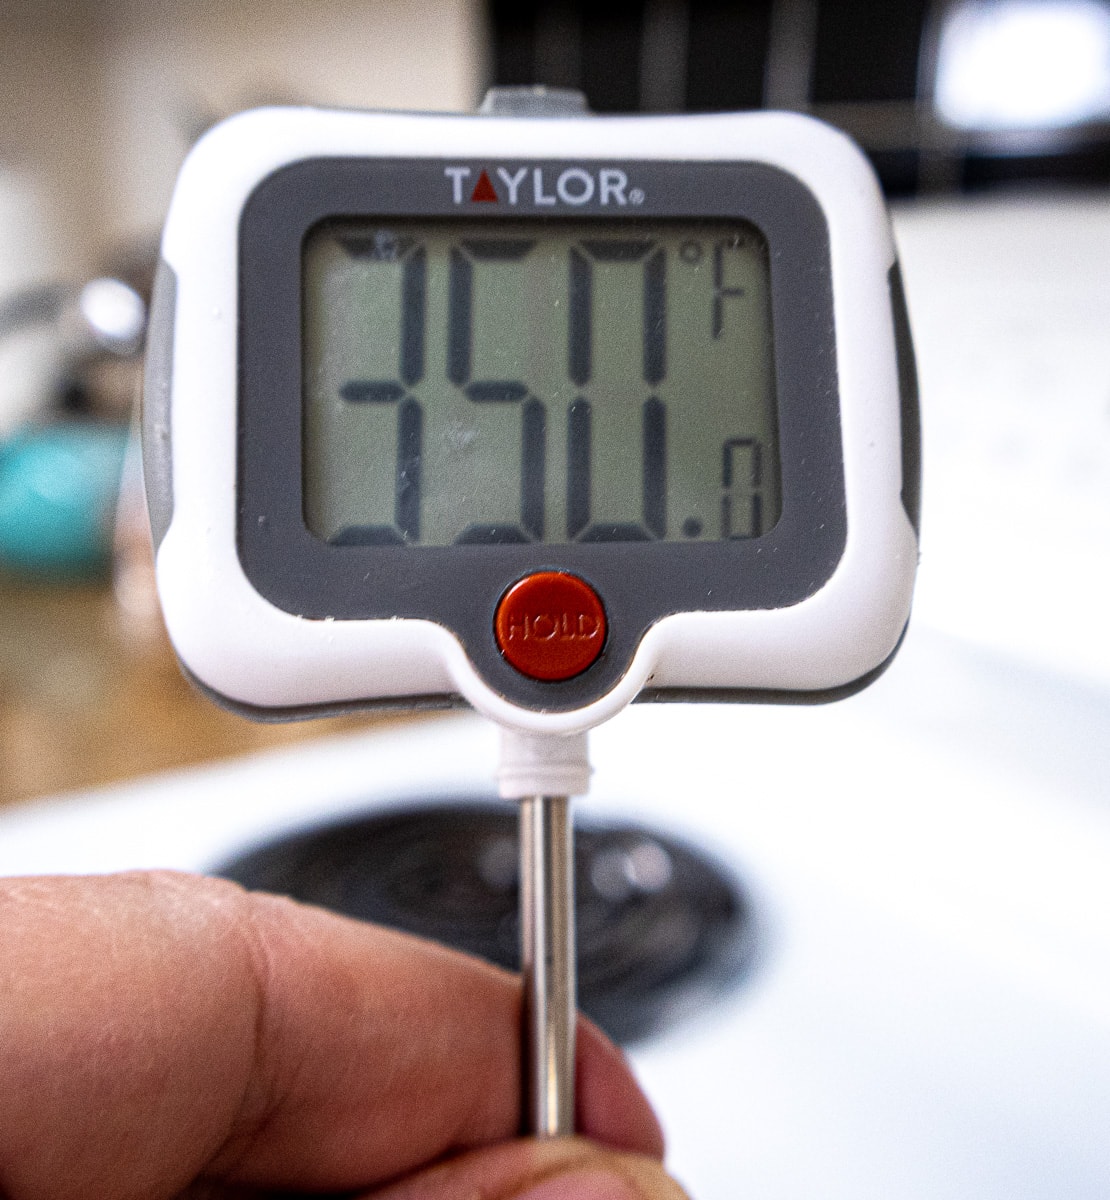 350°F on thermometer